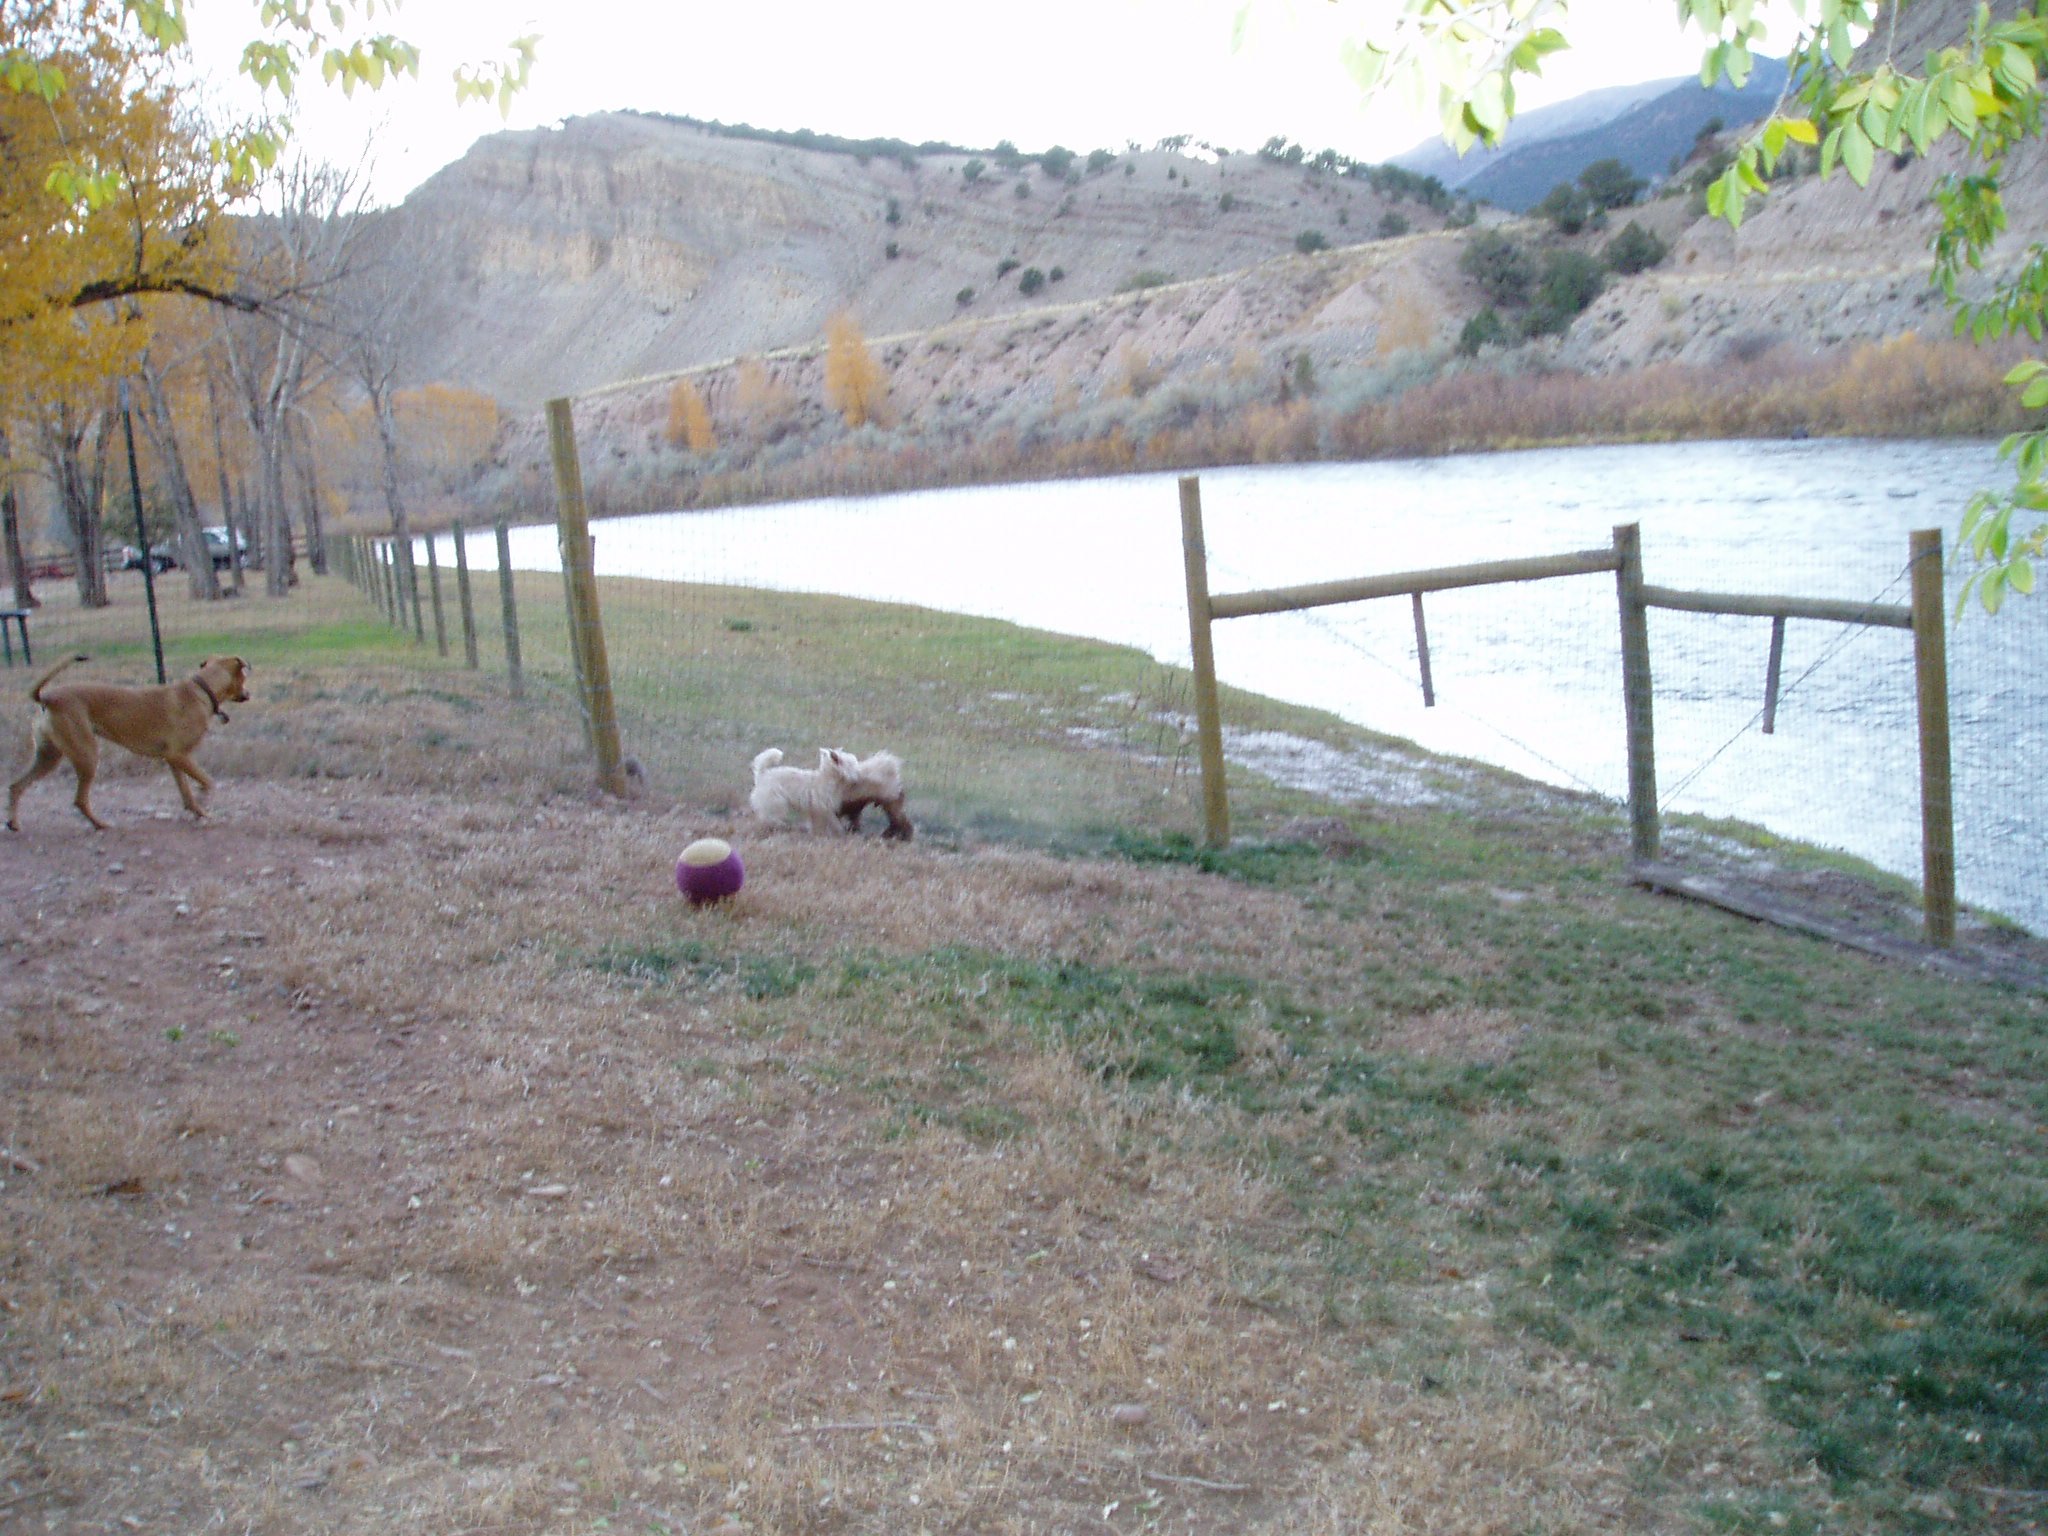 Dogs with Ball and River